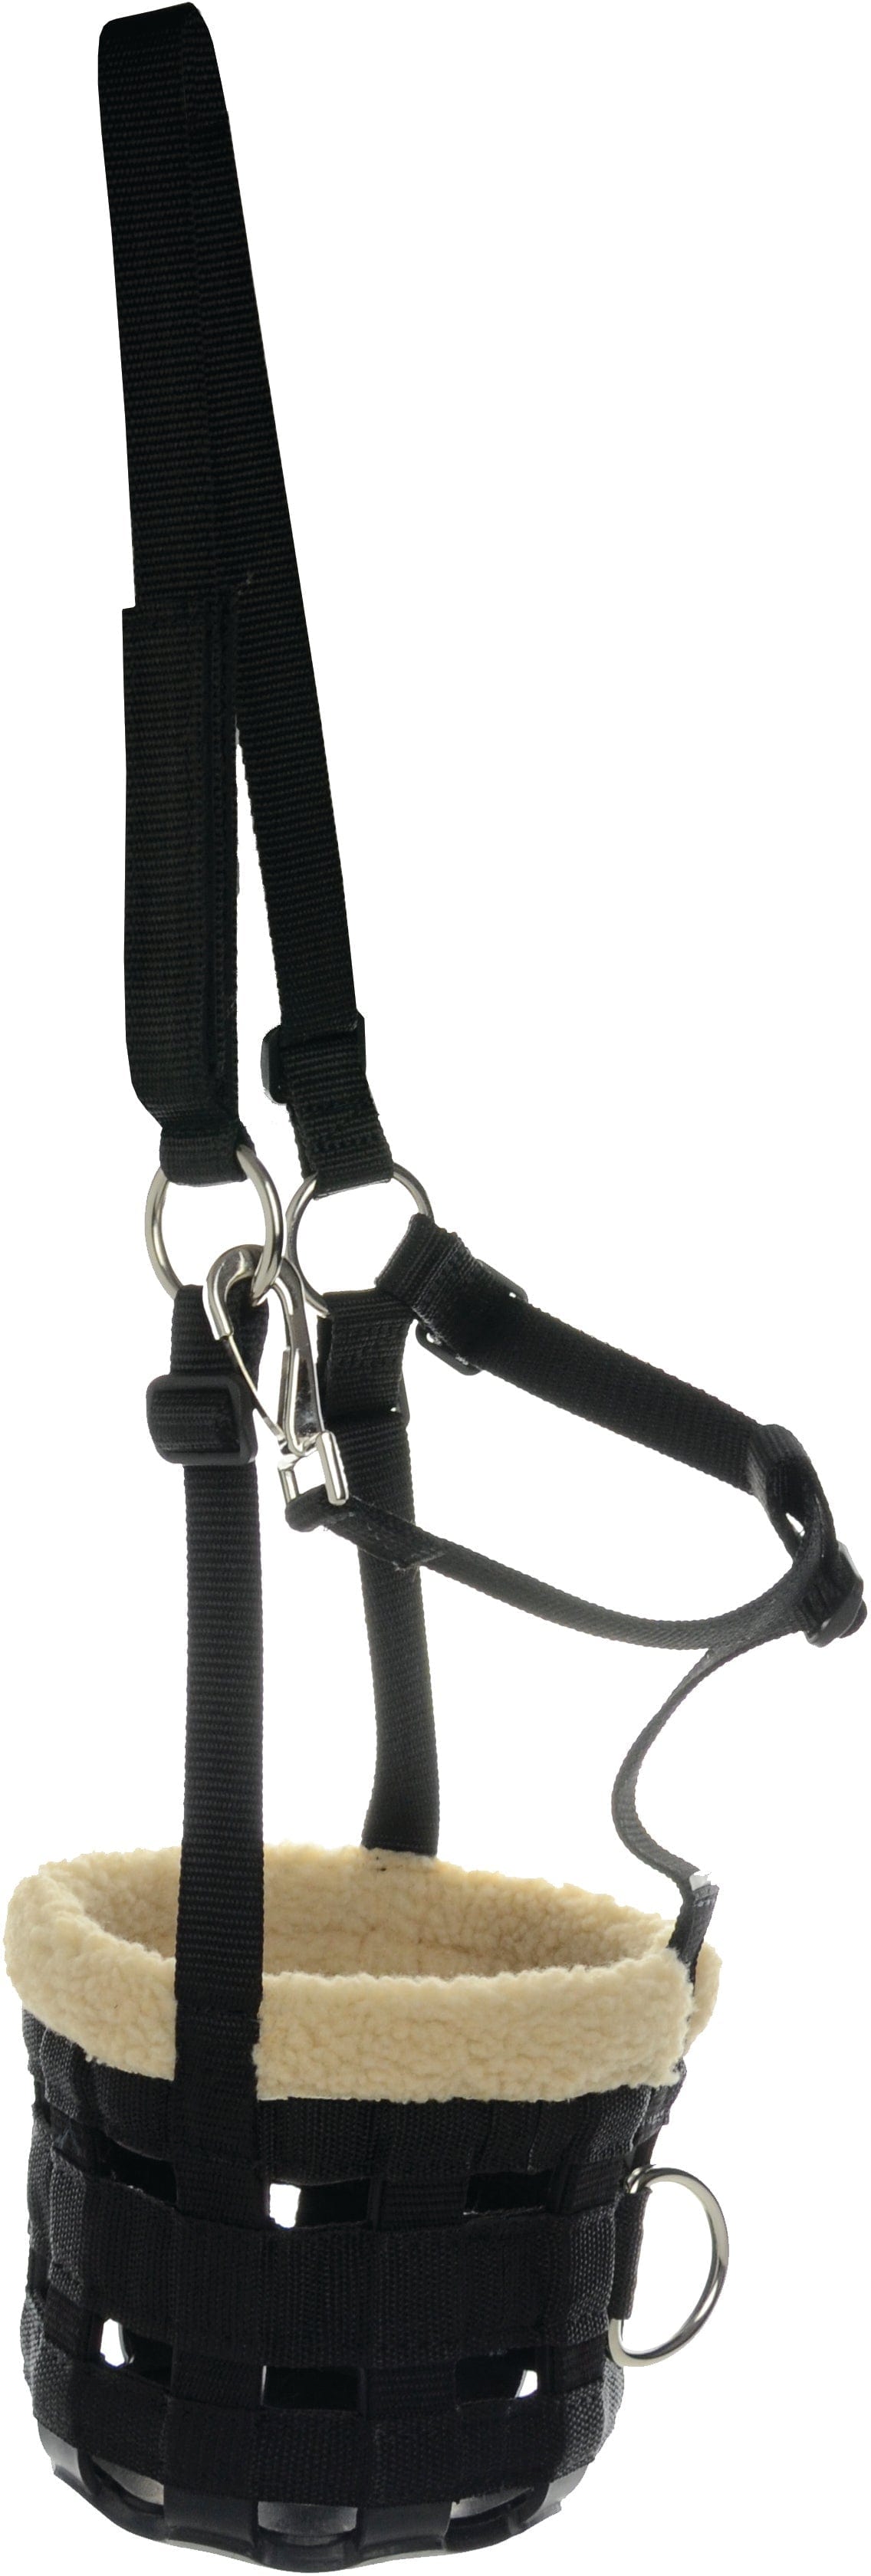 Hy equestrian muzzle with fleece